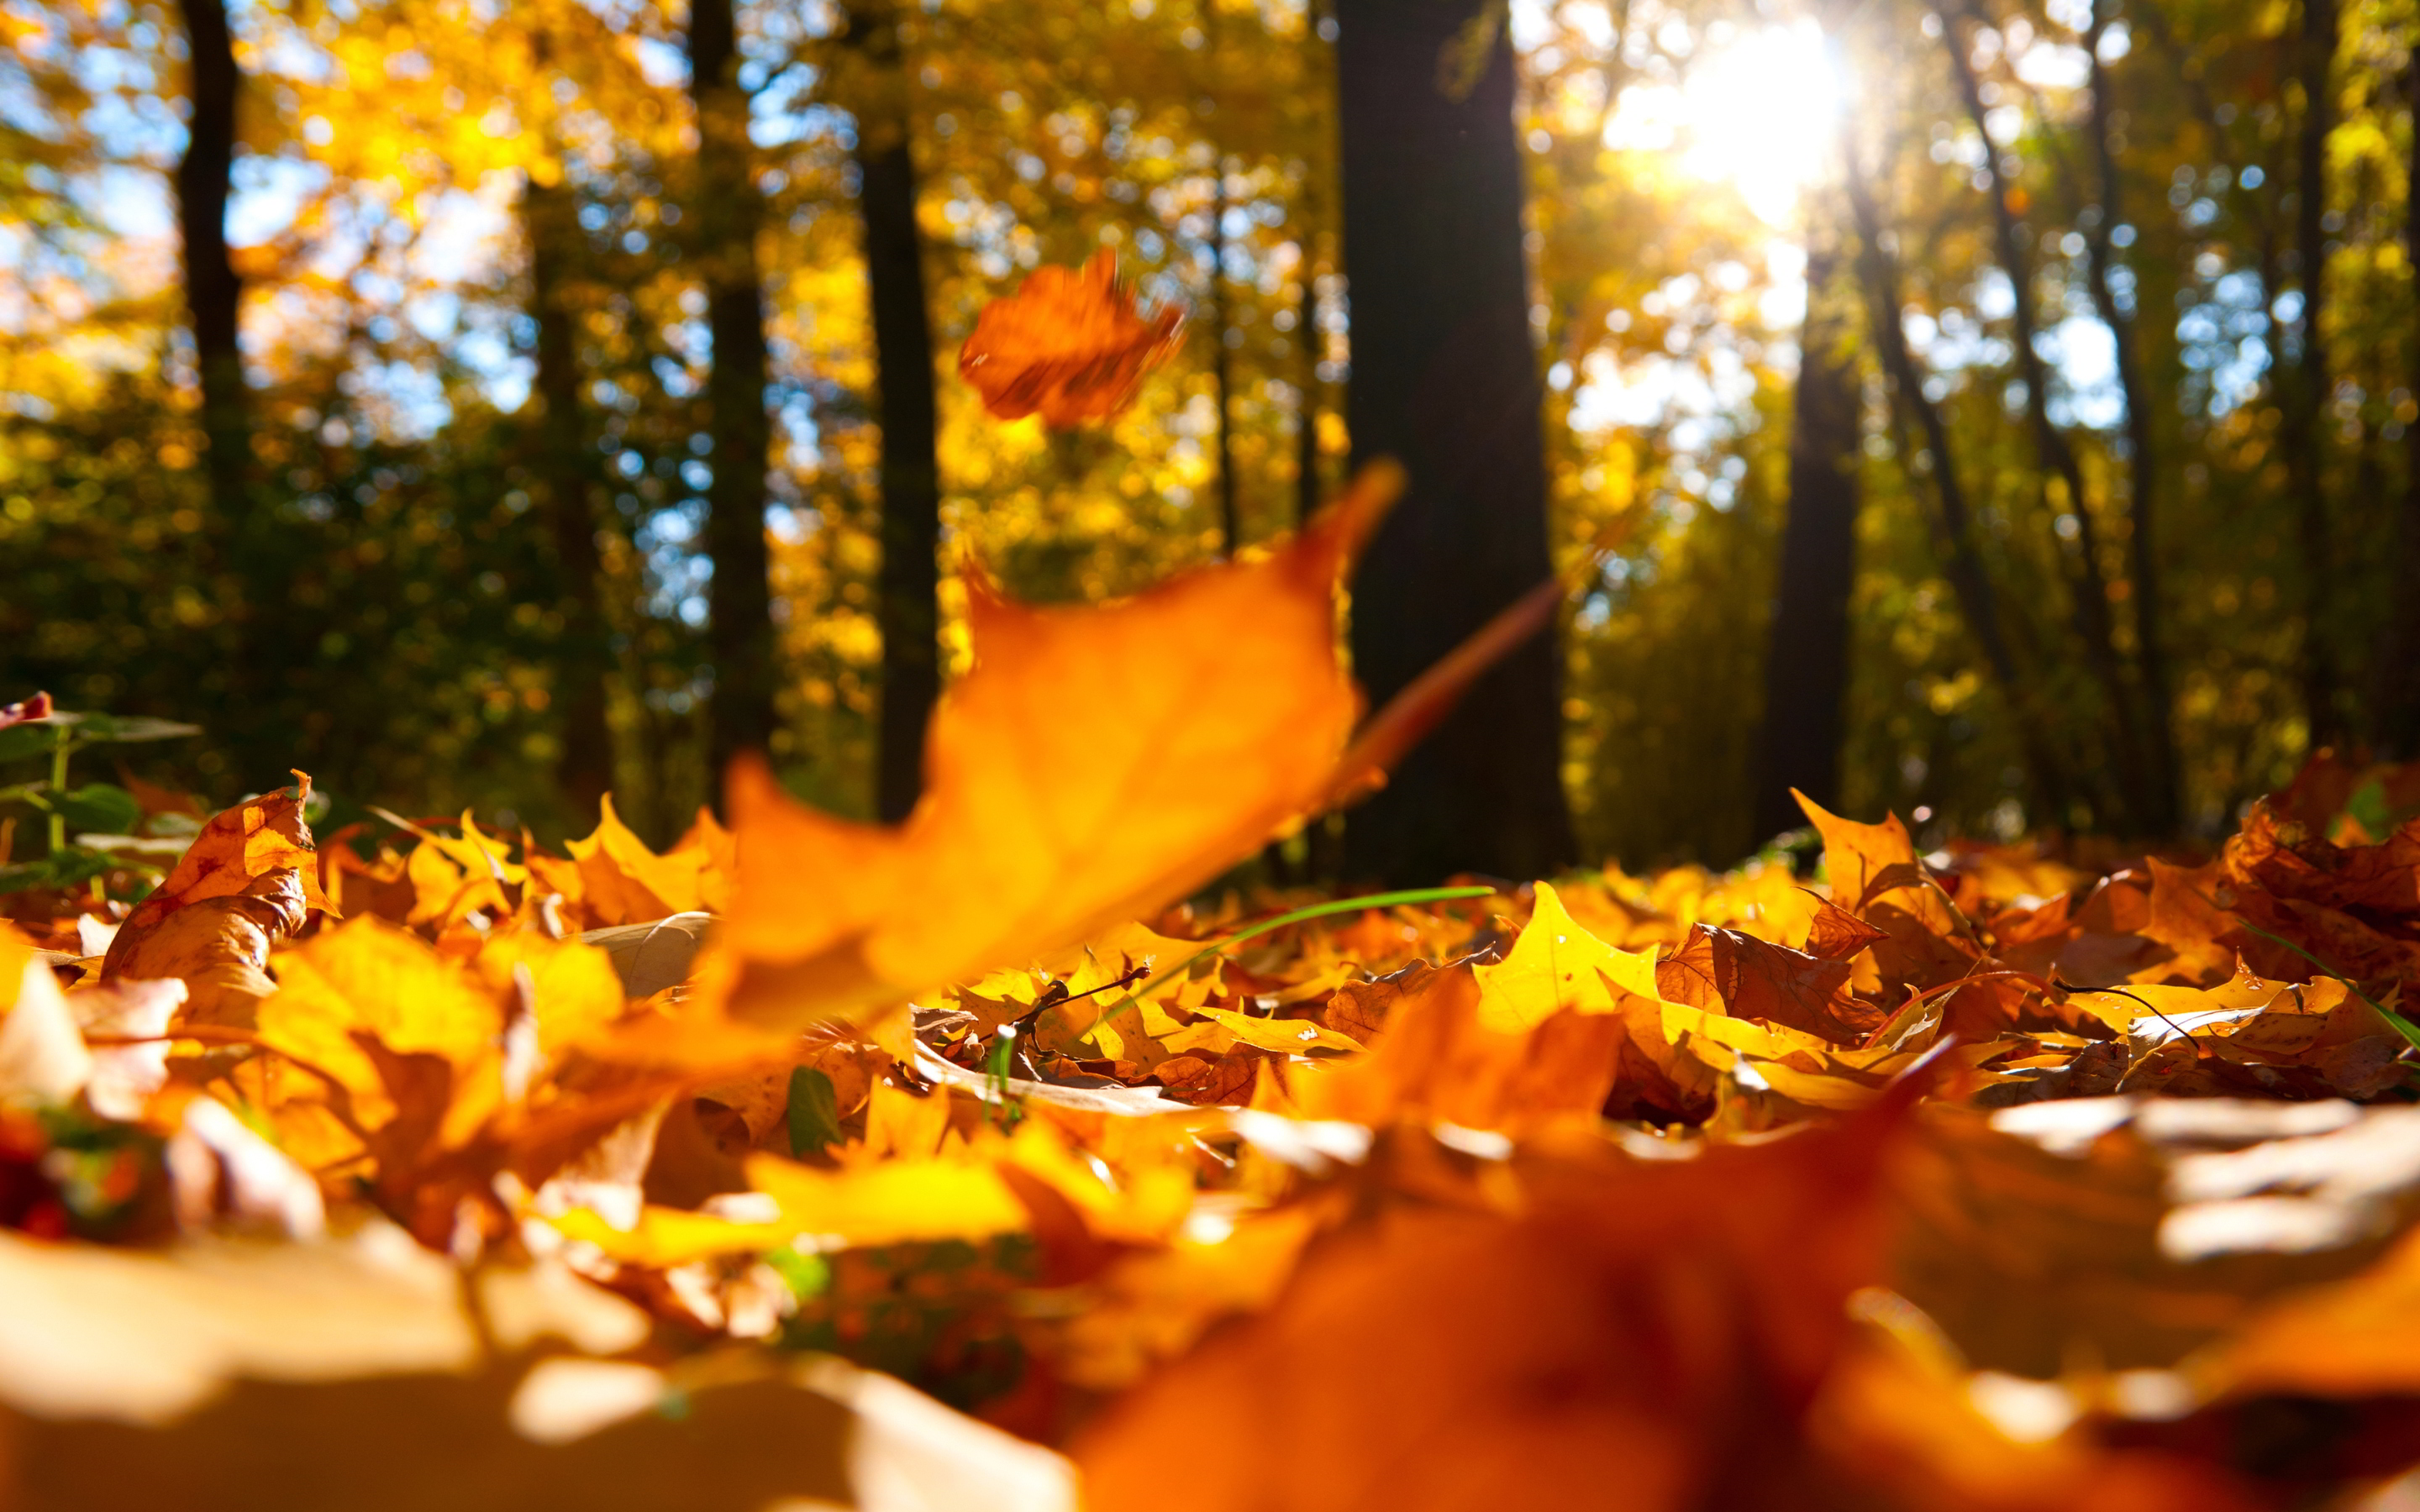 Autumn falling leaves ground wallpaper | 2880x1800 | #29040